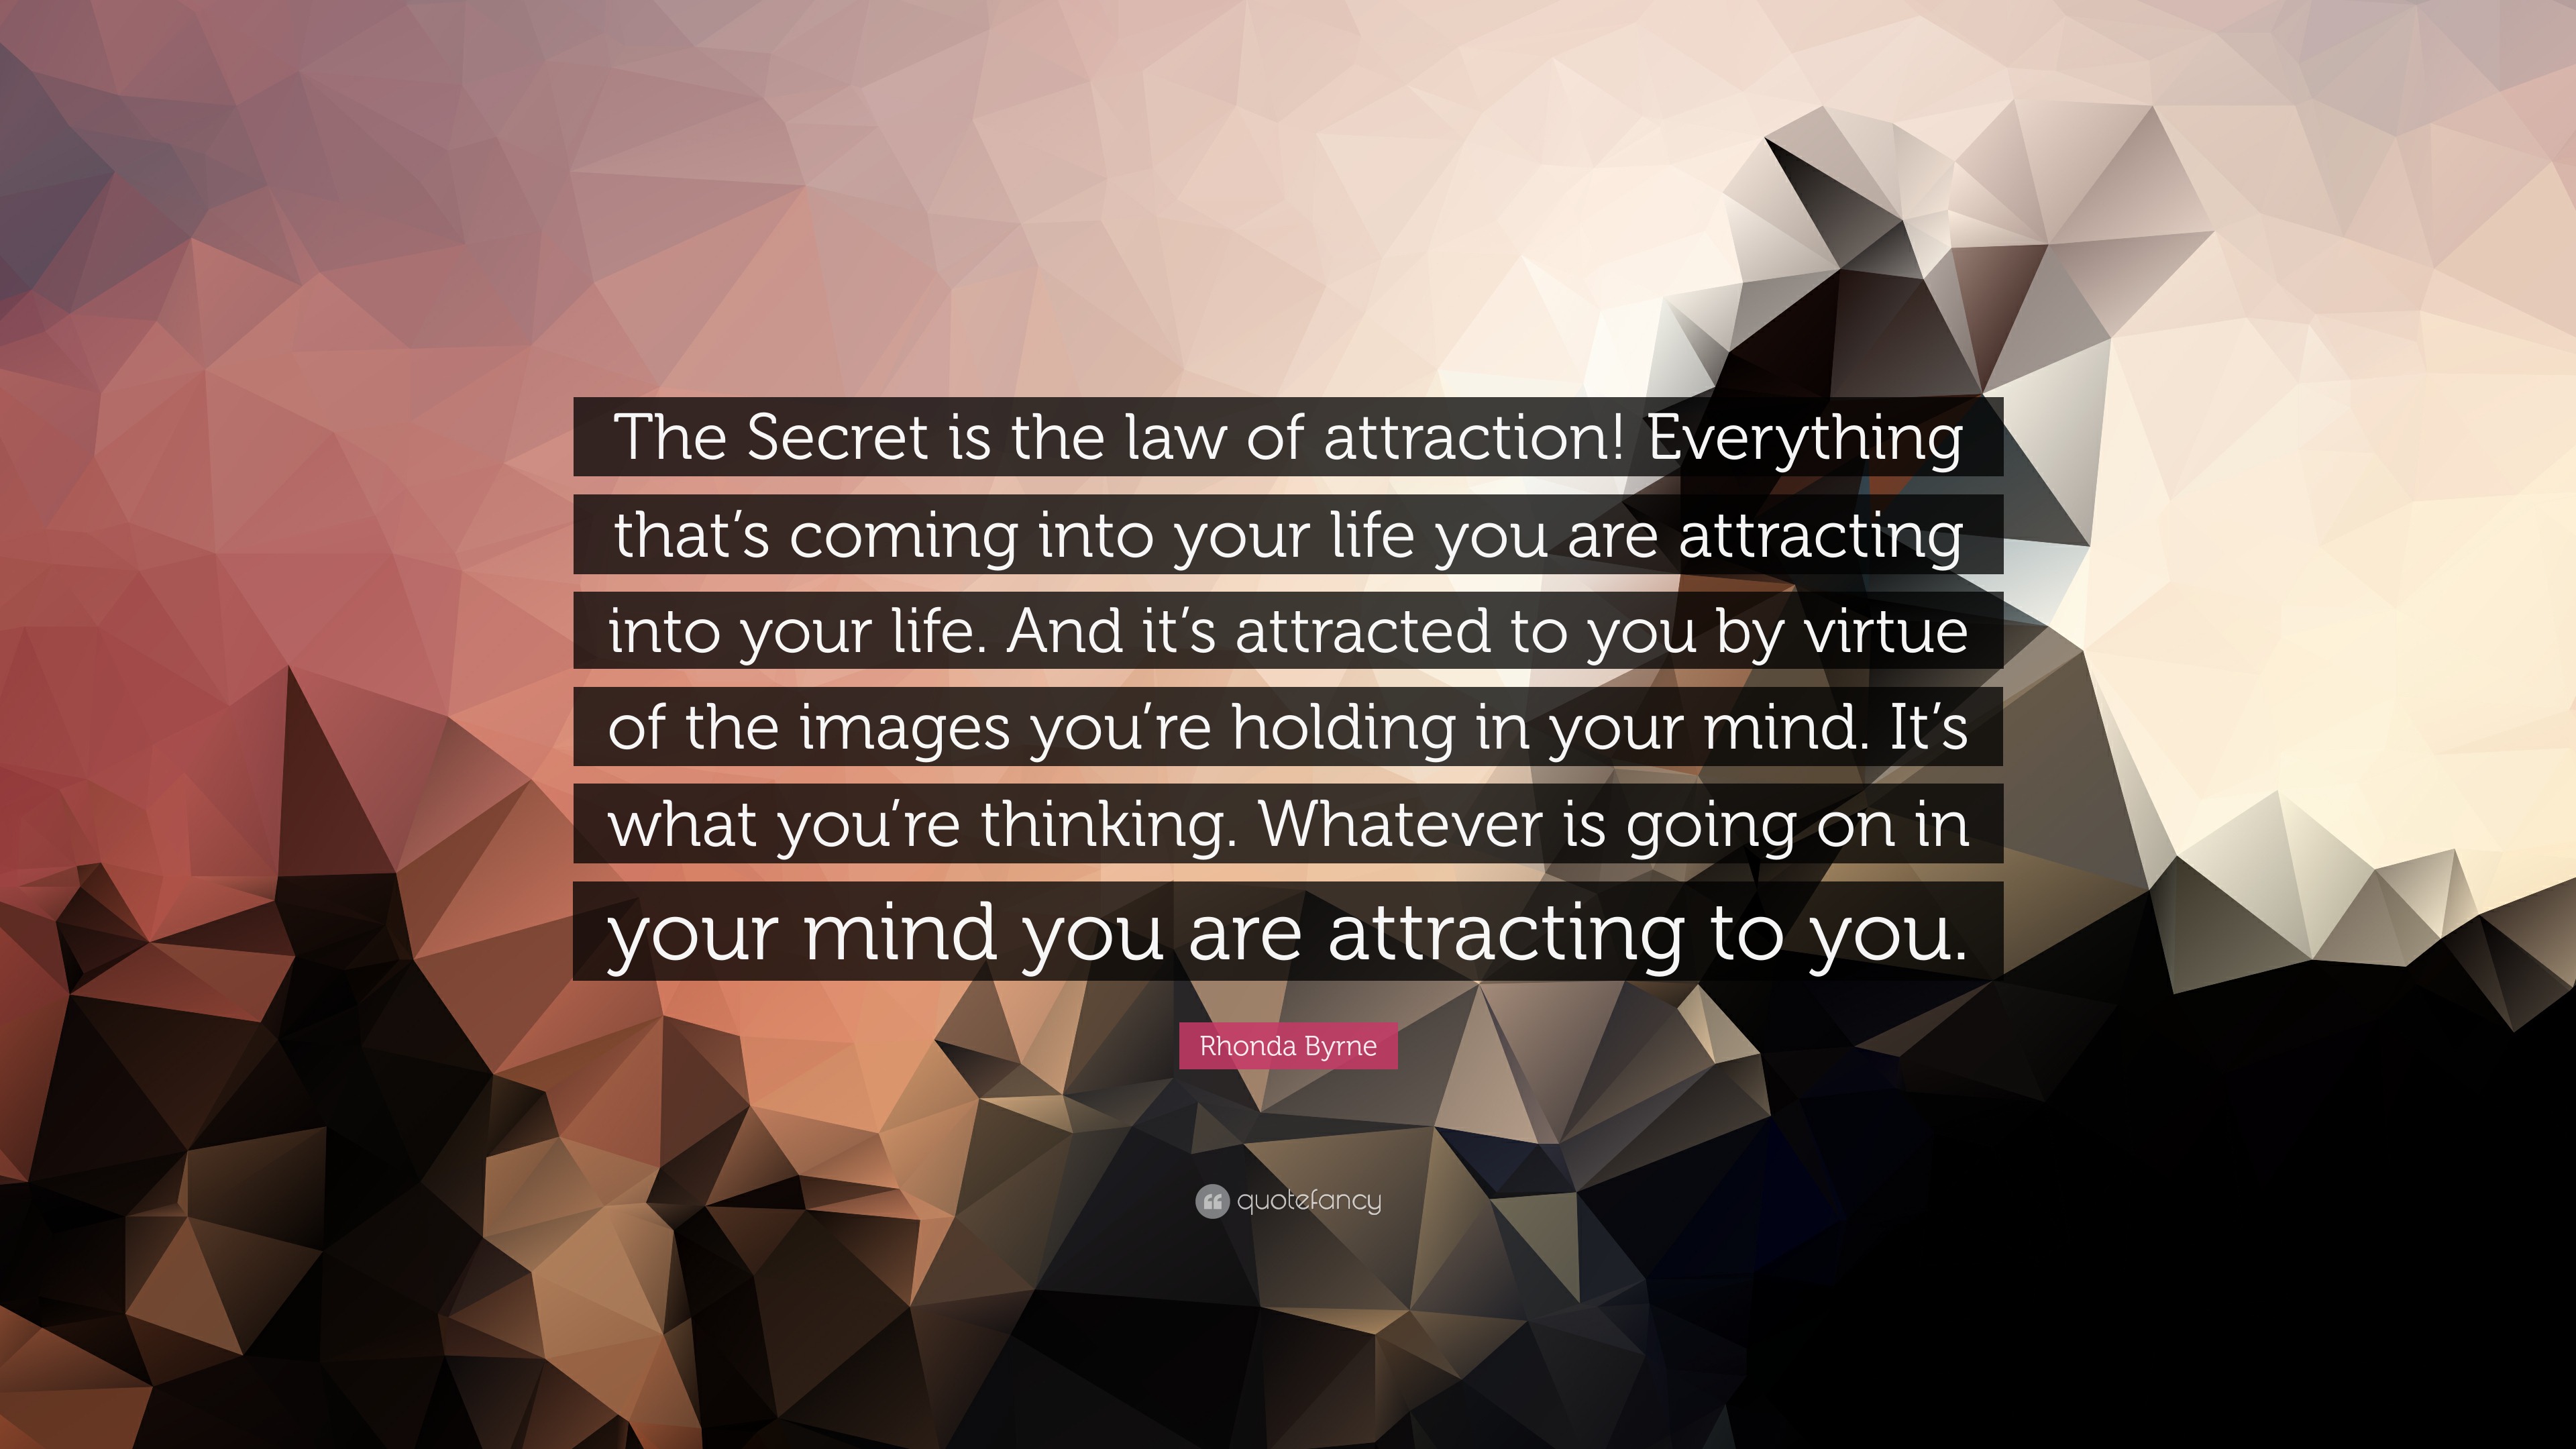 The Secret® to the Law of Attraction